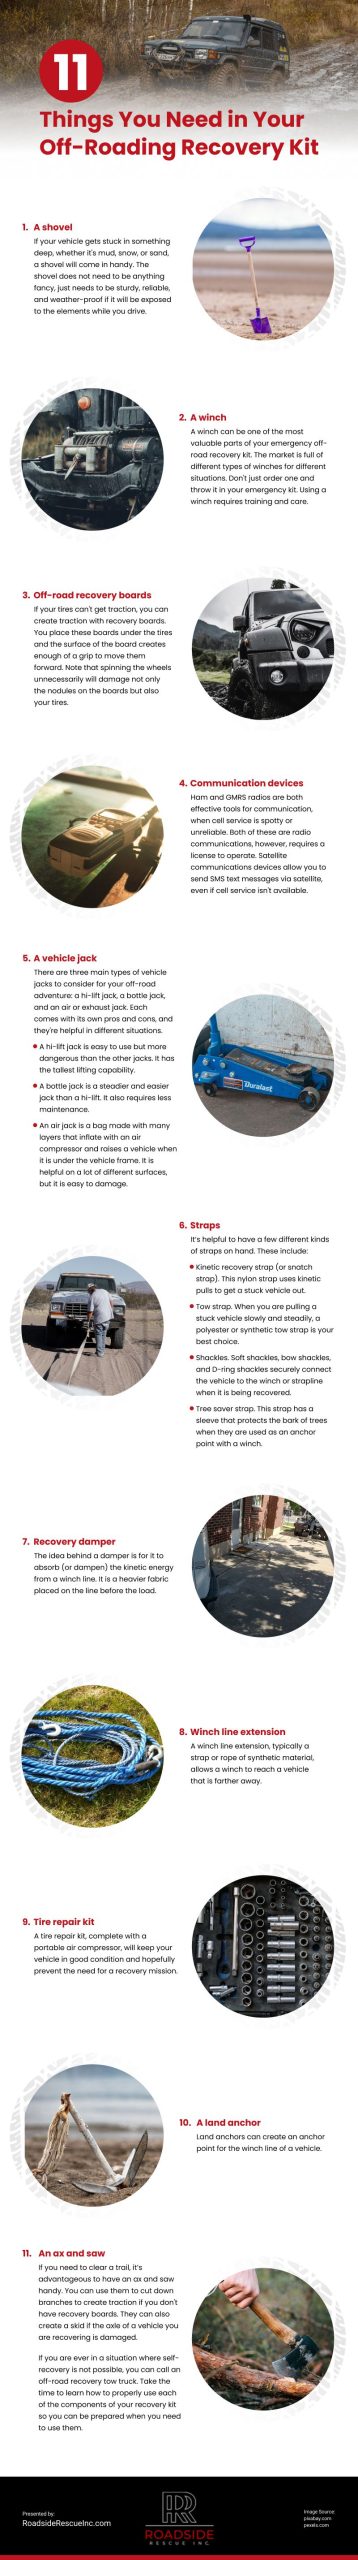 11 Things You Need in Your Off-Roading Recovery Kit Infographic